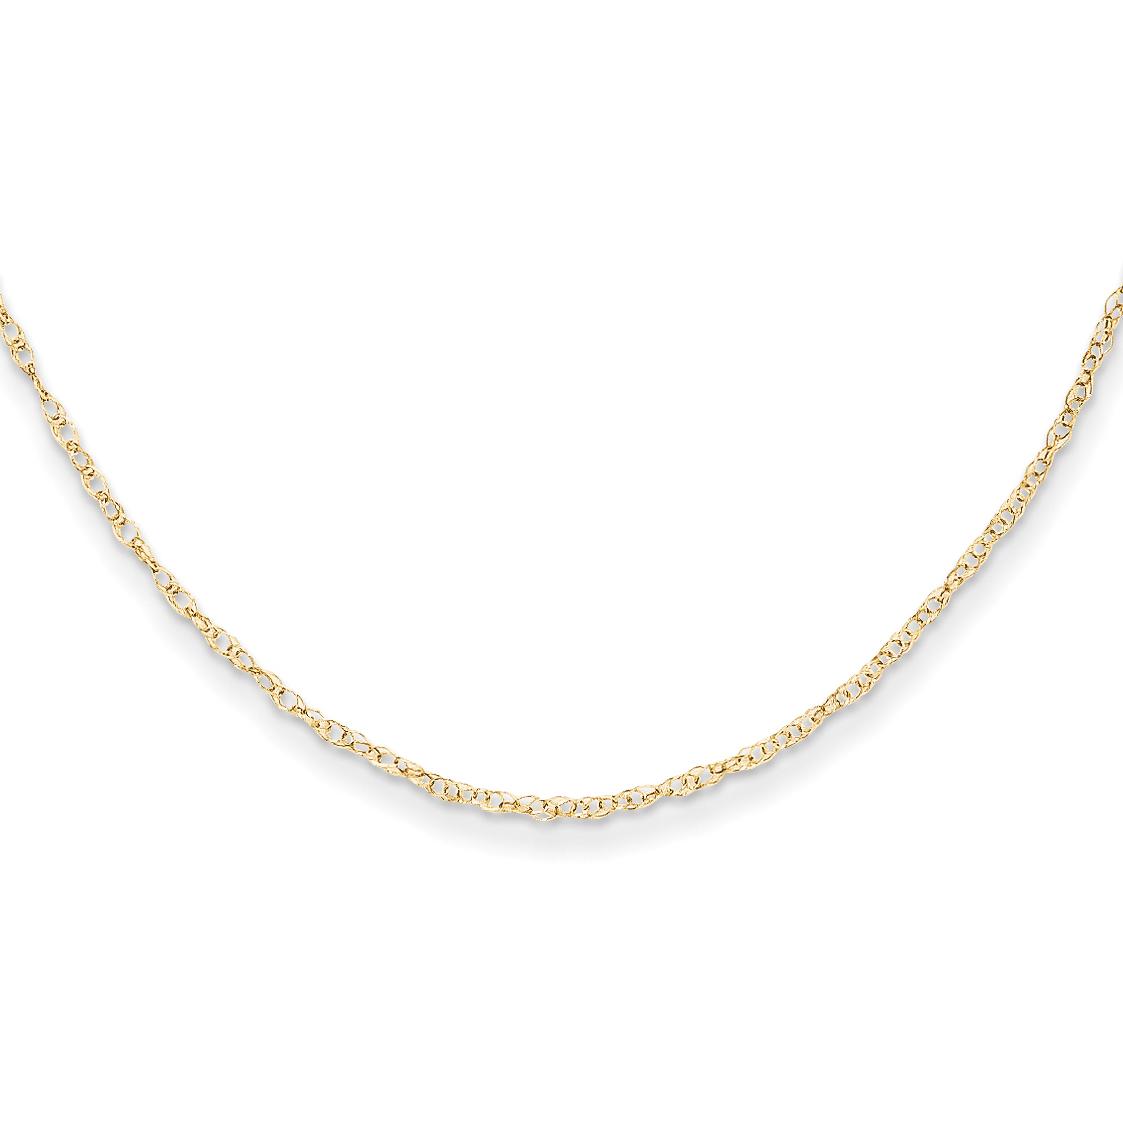 Findingking 14K Gold Rope Chain Childrens Necklace Jewelry 13"